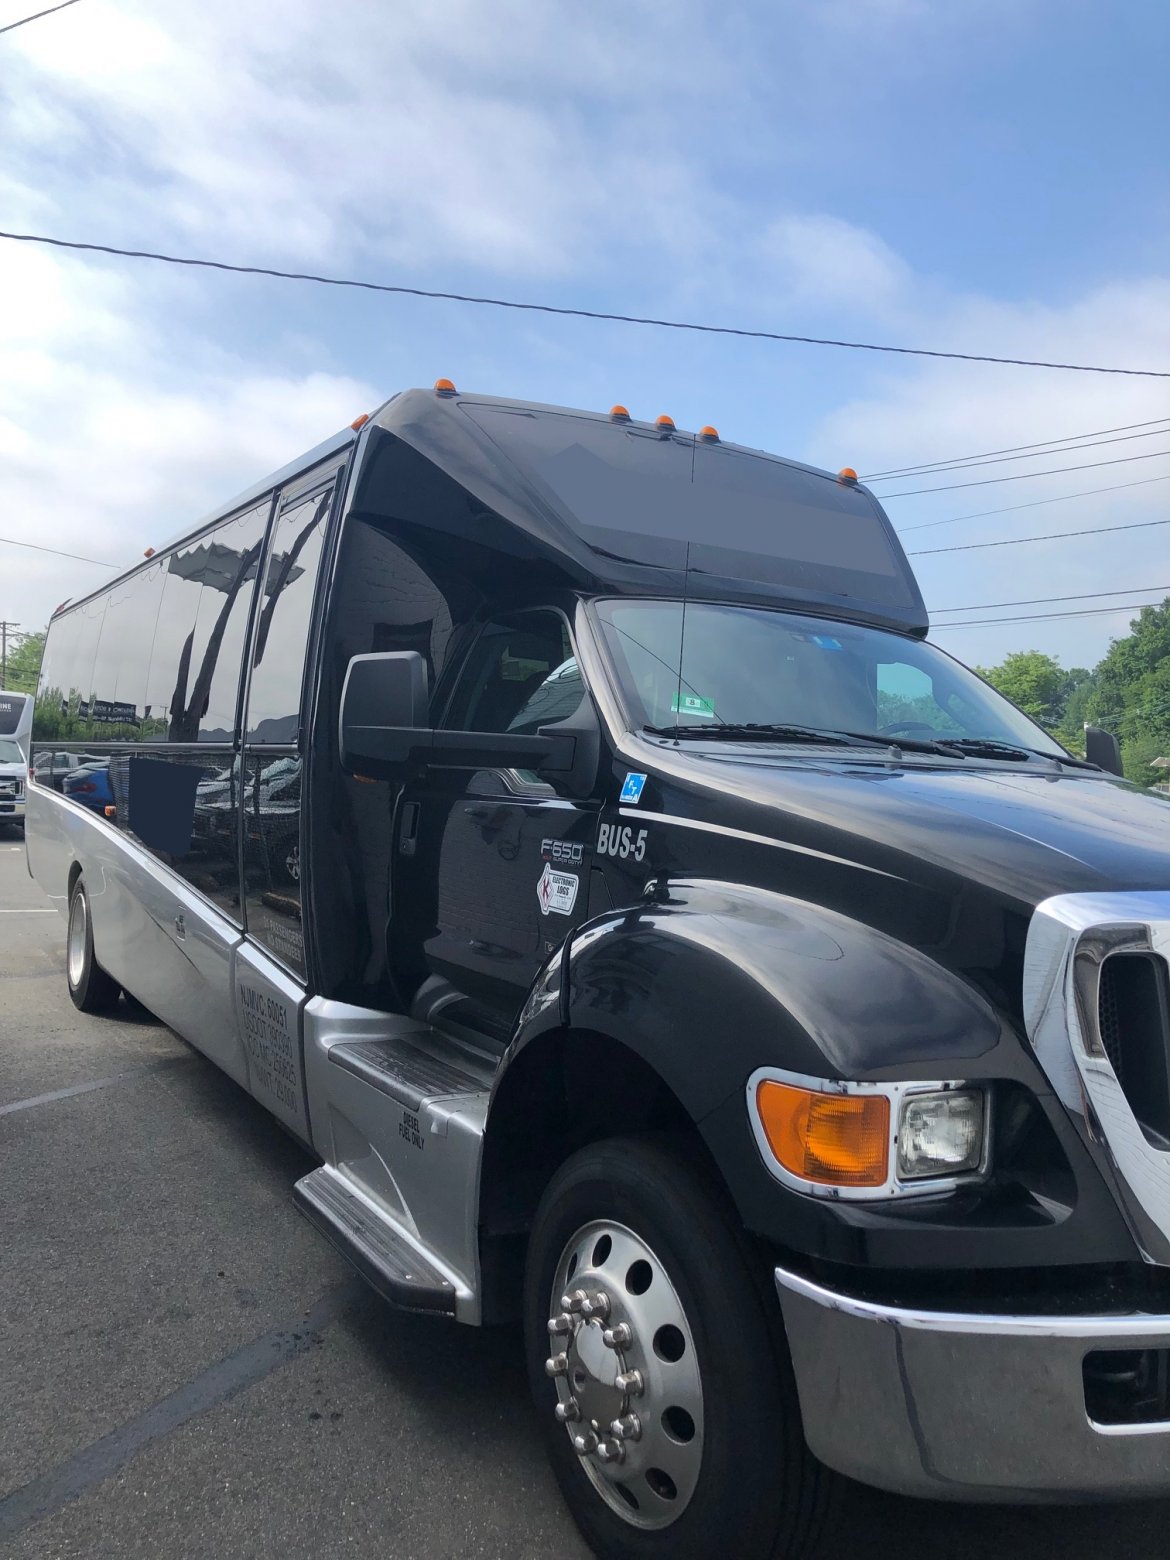 Executive Shuttle for sale: 2013 Ford F650 by Grech Motors